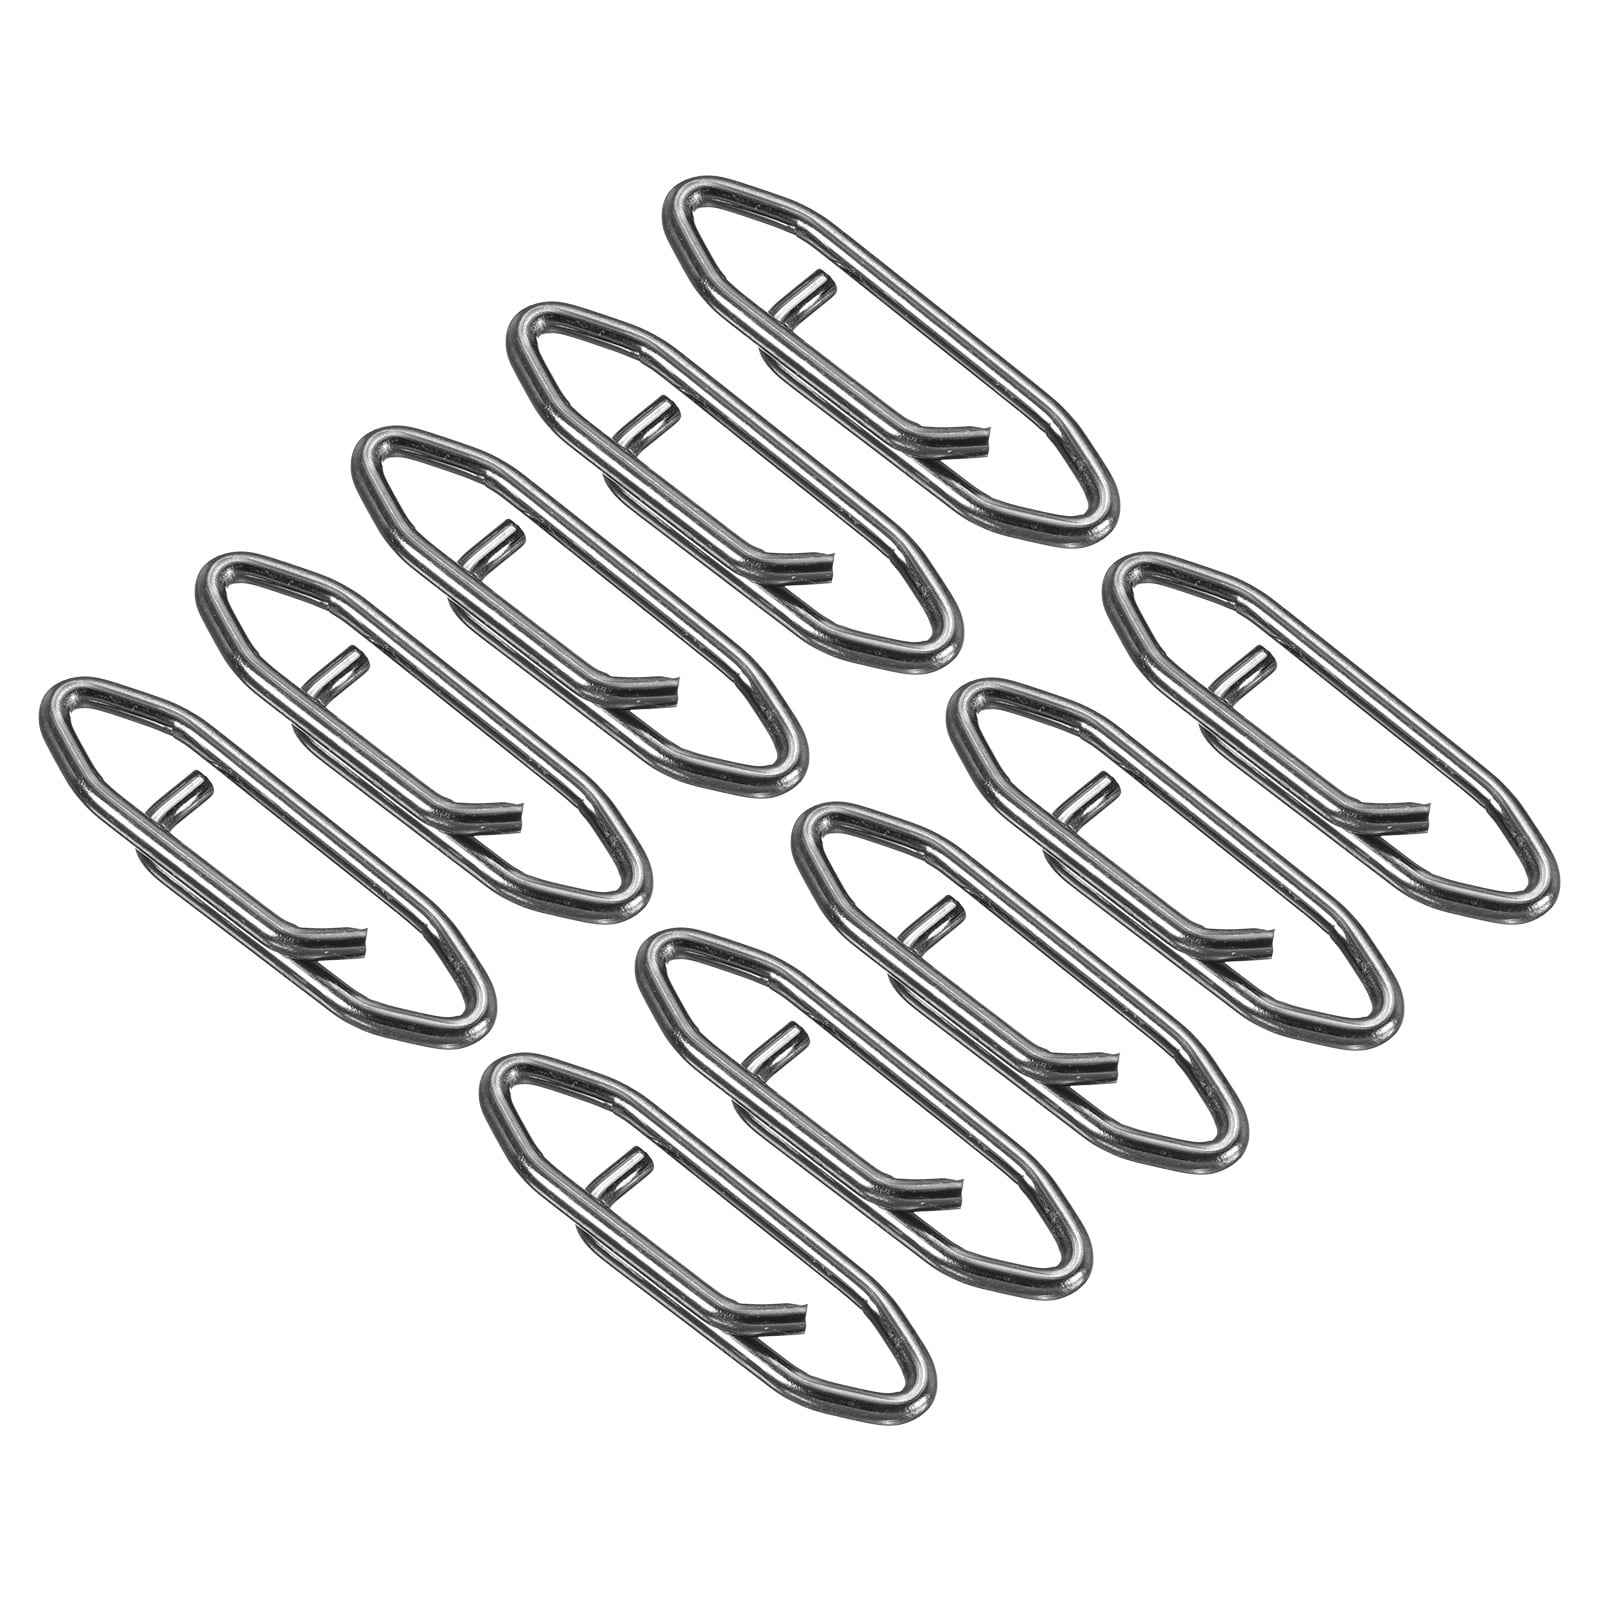 Uxcell 123LBS Stainless Connector Clip Lure Fishing Snap Swivels, 100 Pack